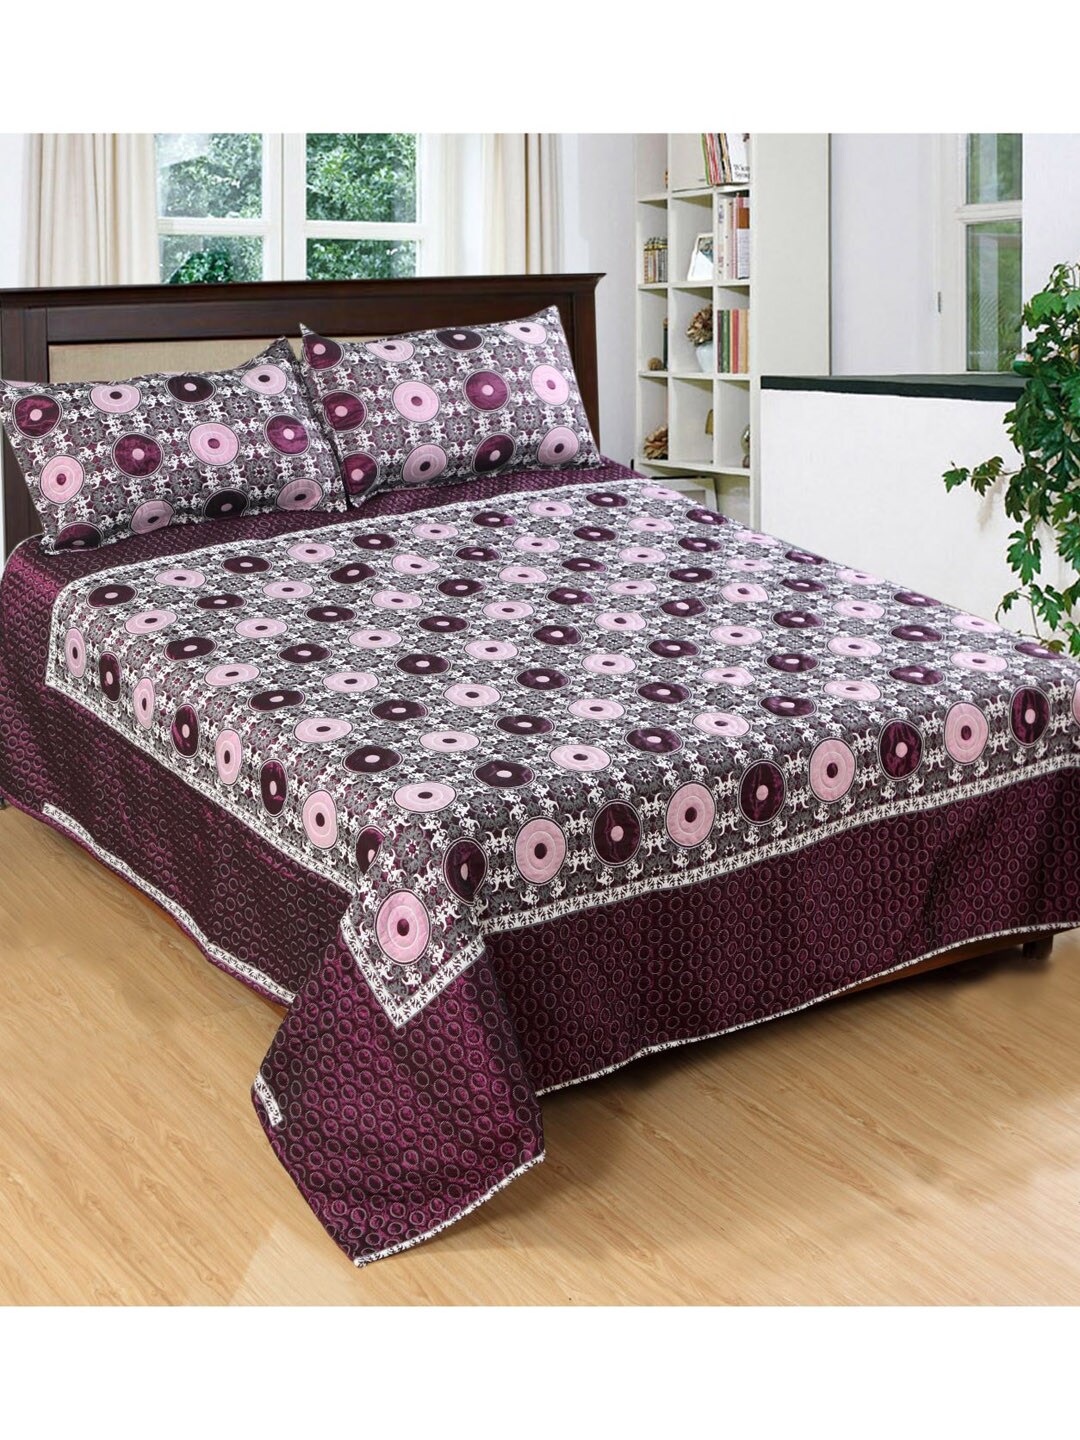 Varde Purple & White Woven Design Double King Bedcover With 2 Pillow Covers Price in India